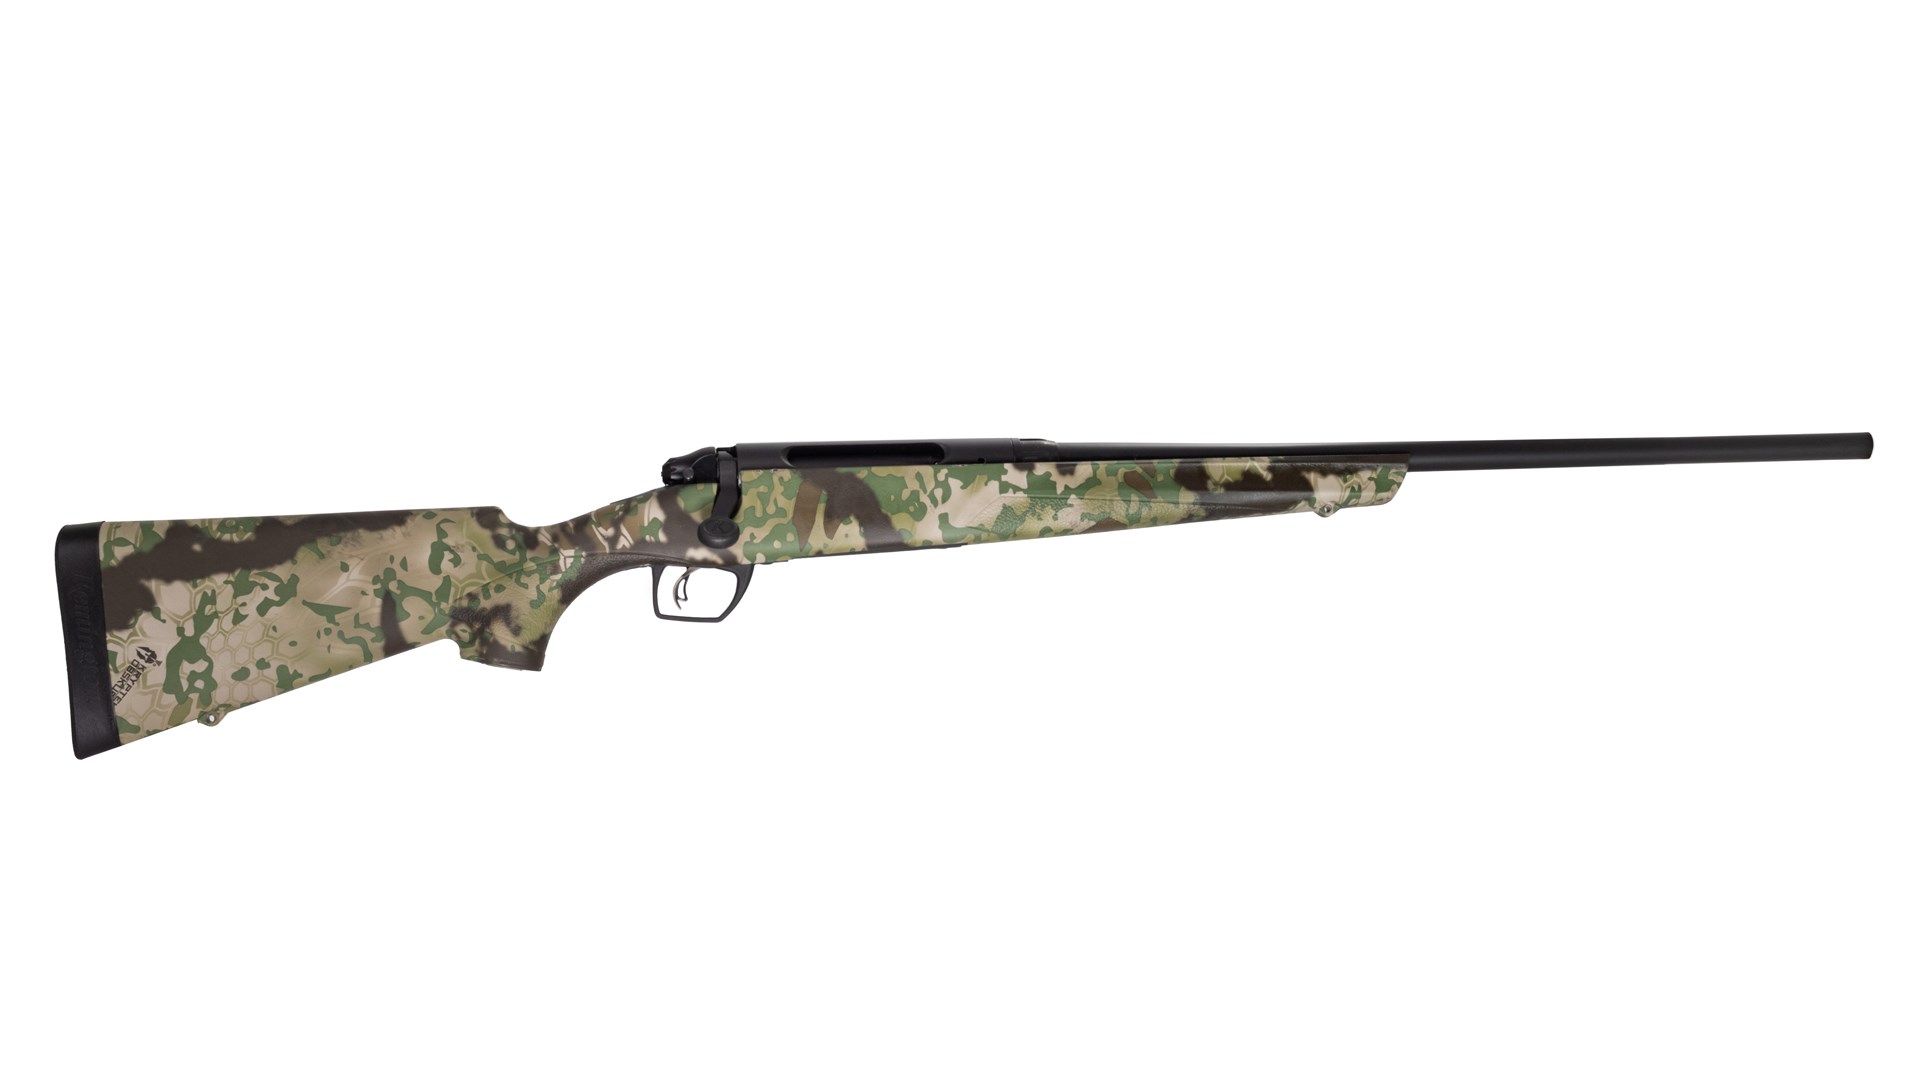 Right side of the RemArms Remington 783 with a camouflage stock.